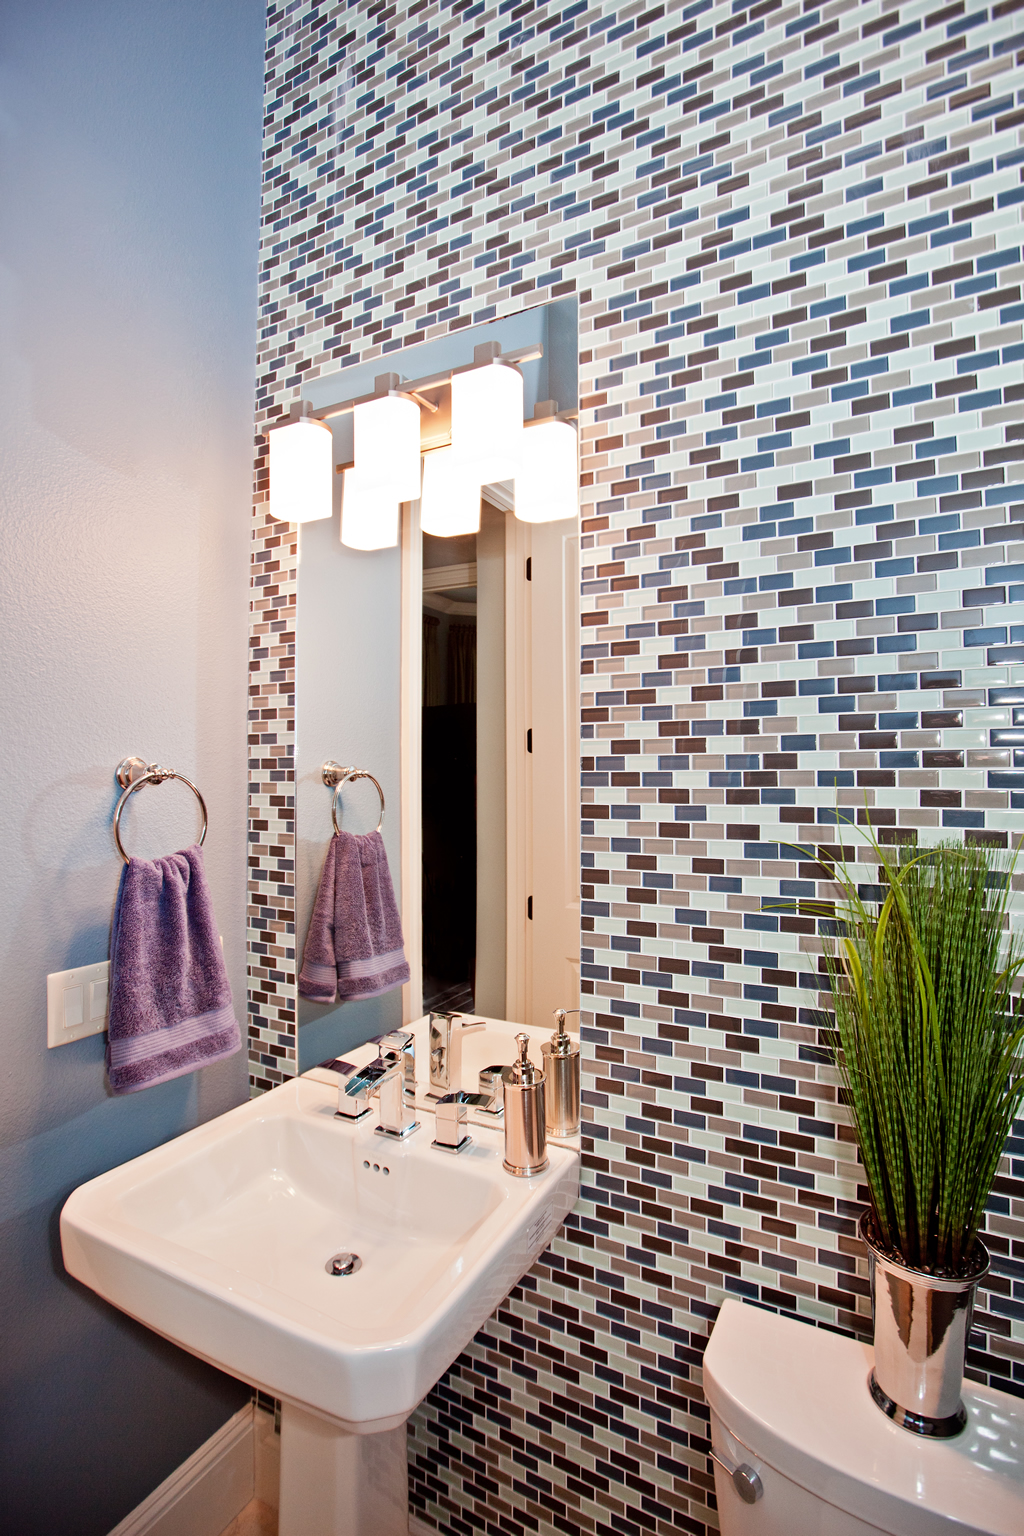 Bathroom Sink With Multi Colored Tiled Wall